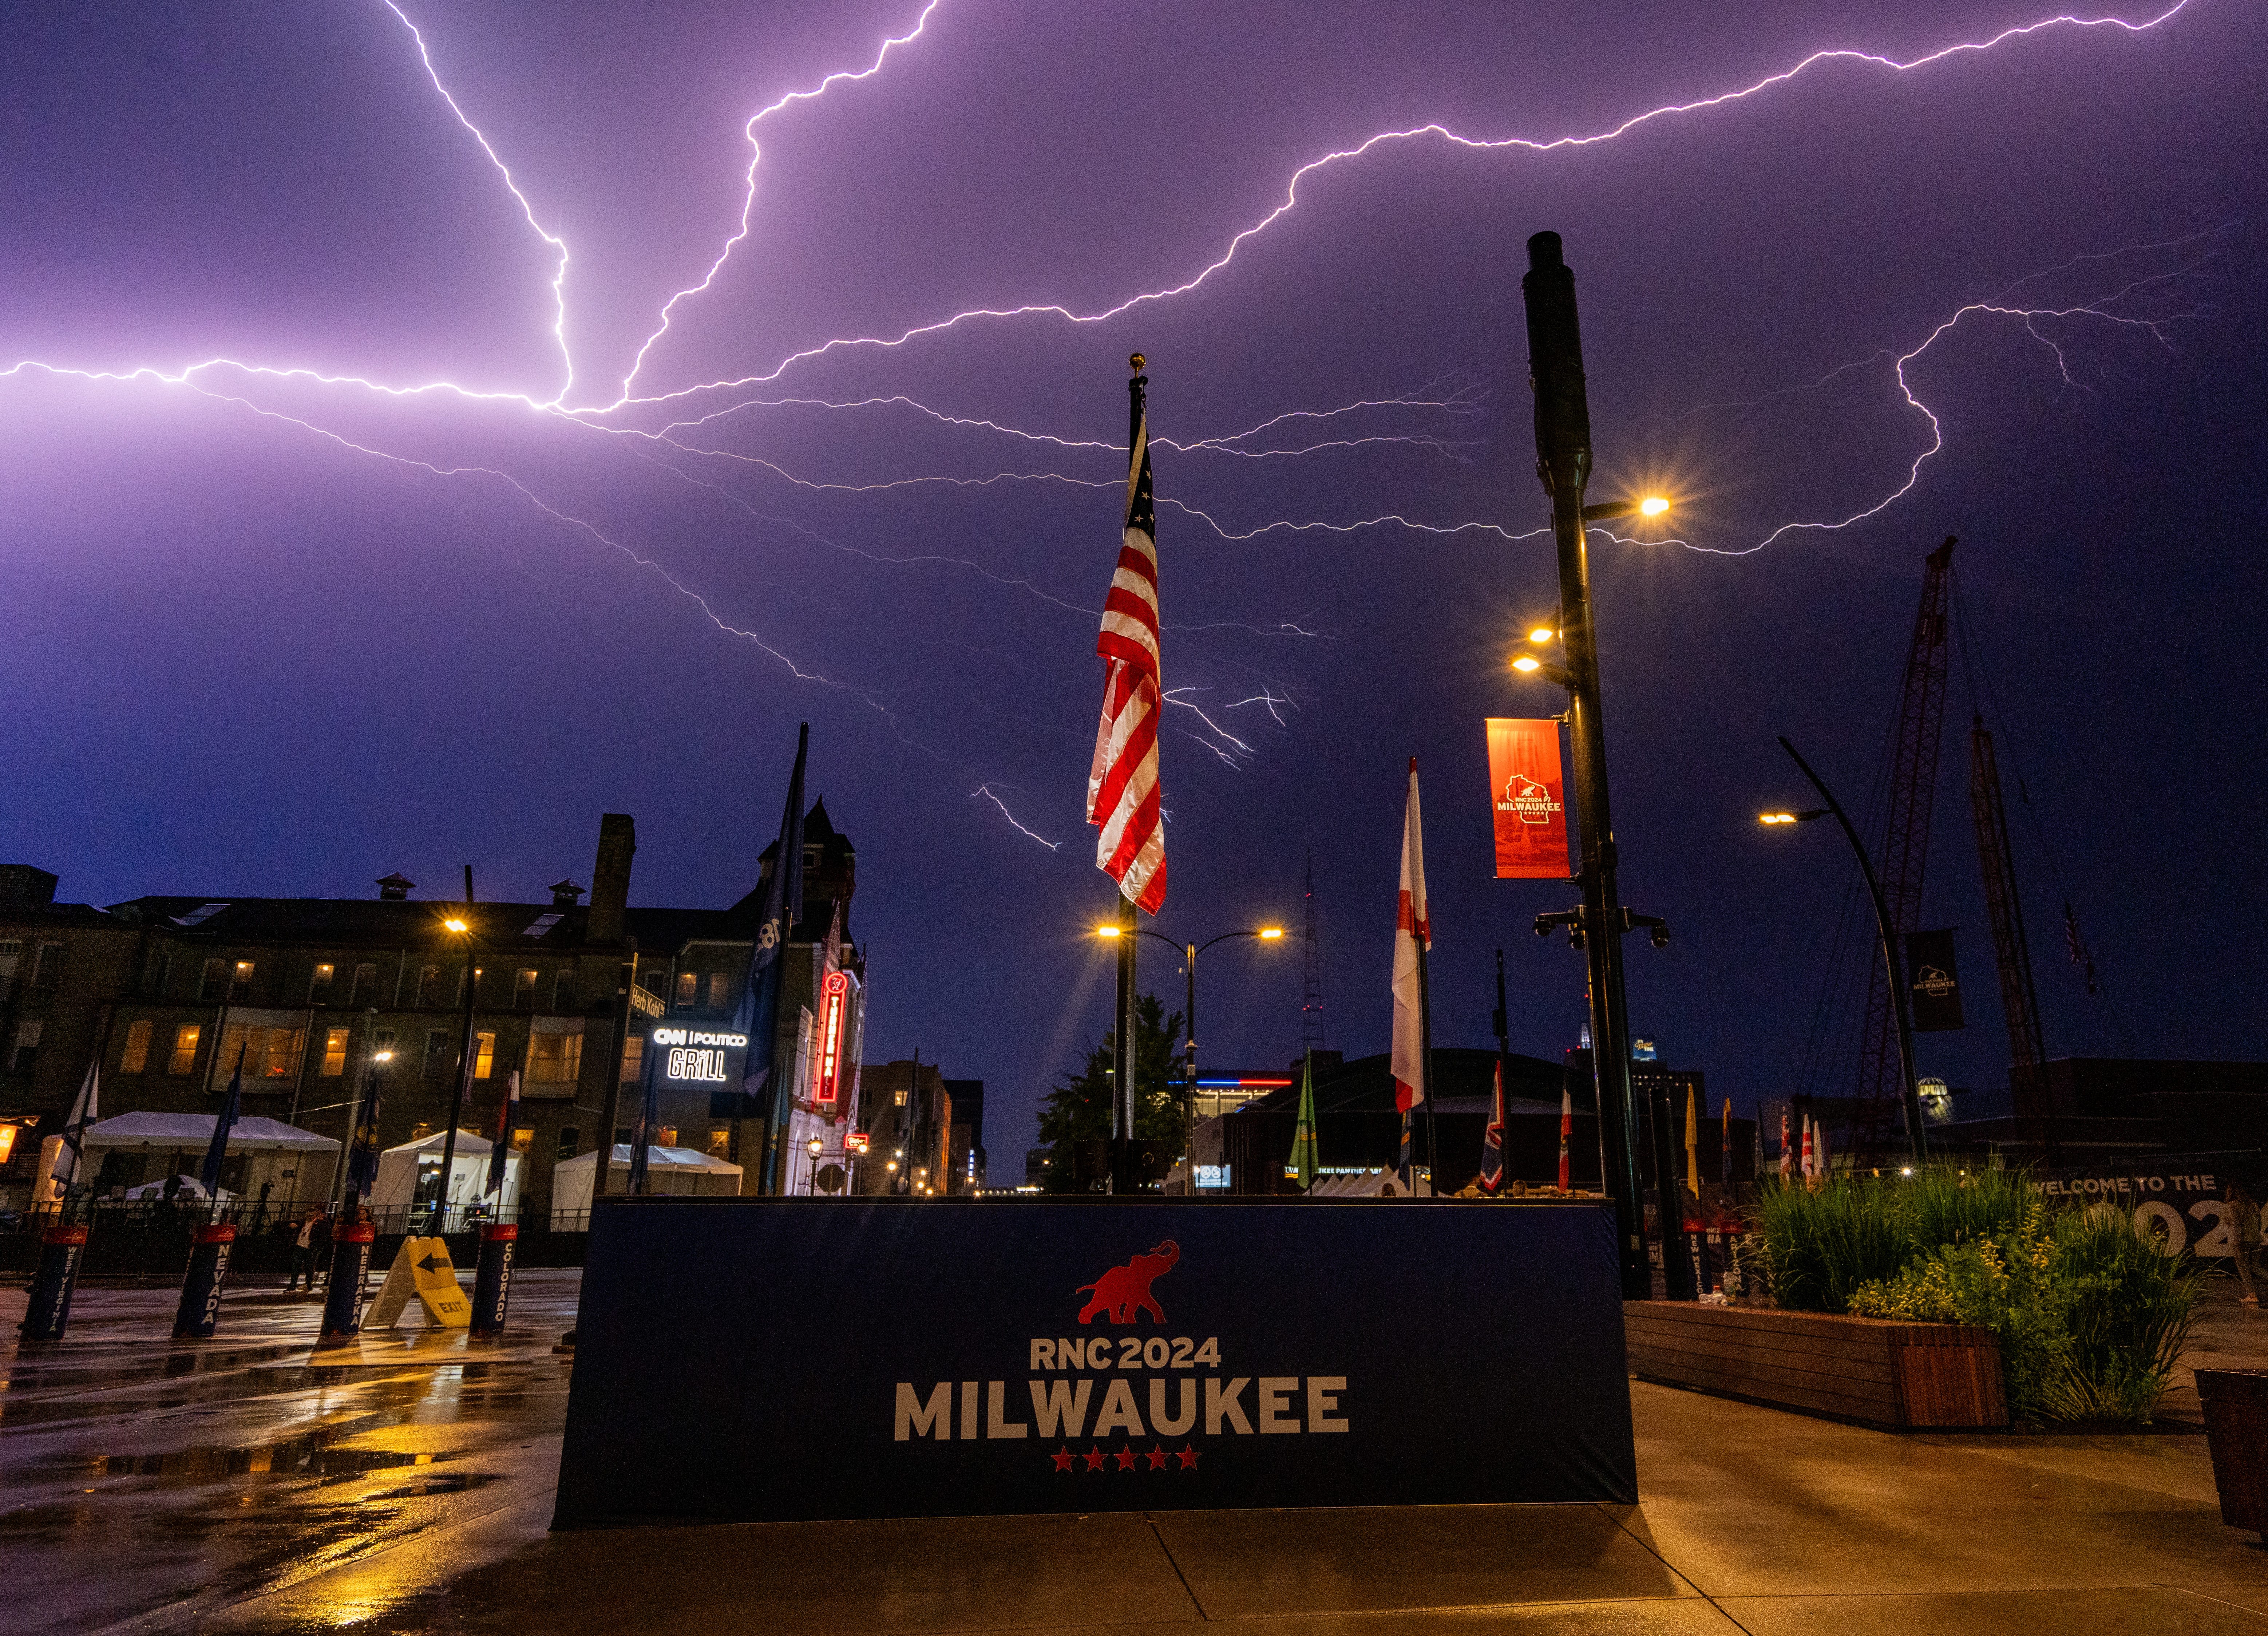 Hot, humid weather and storms are in the extended forecast for Milwaukee